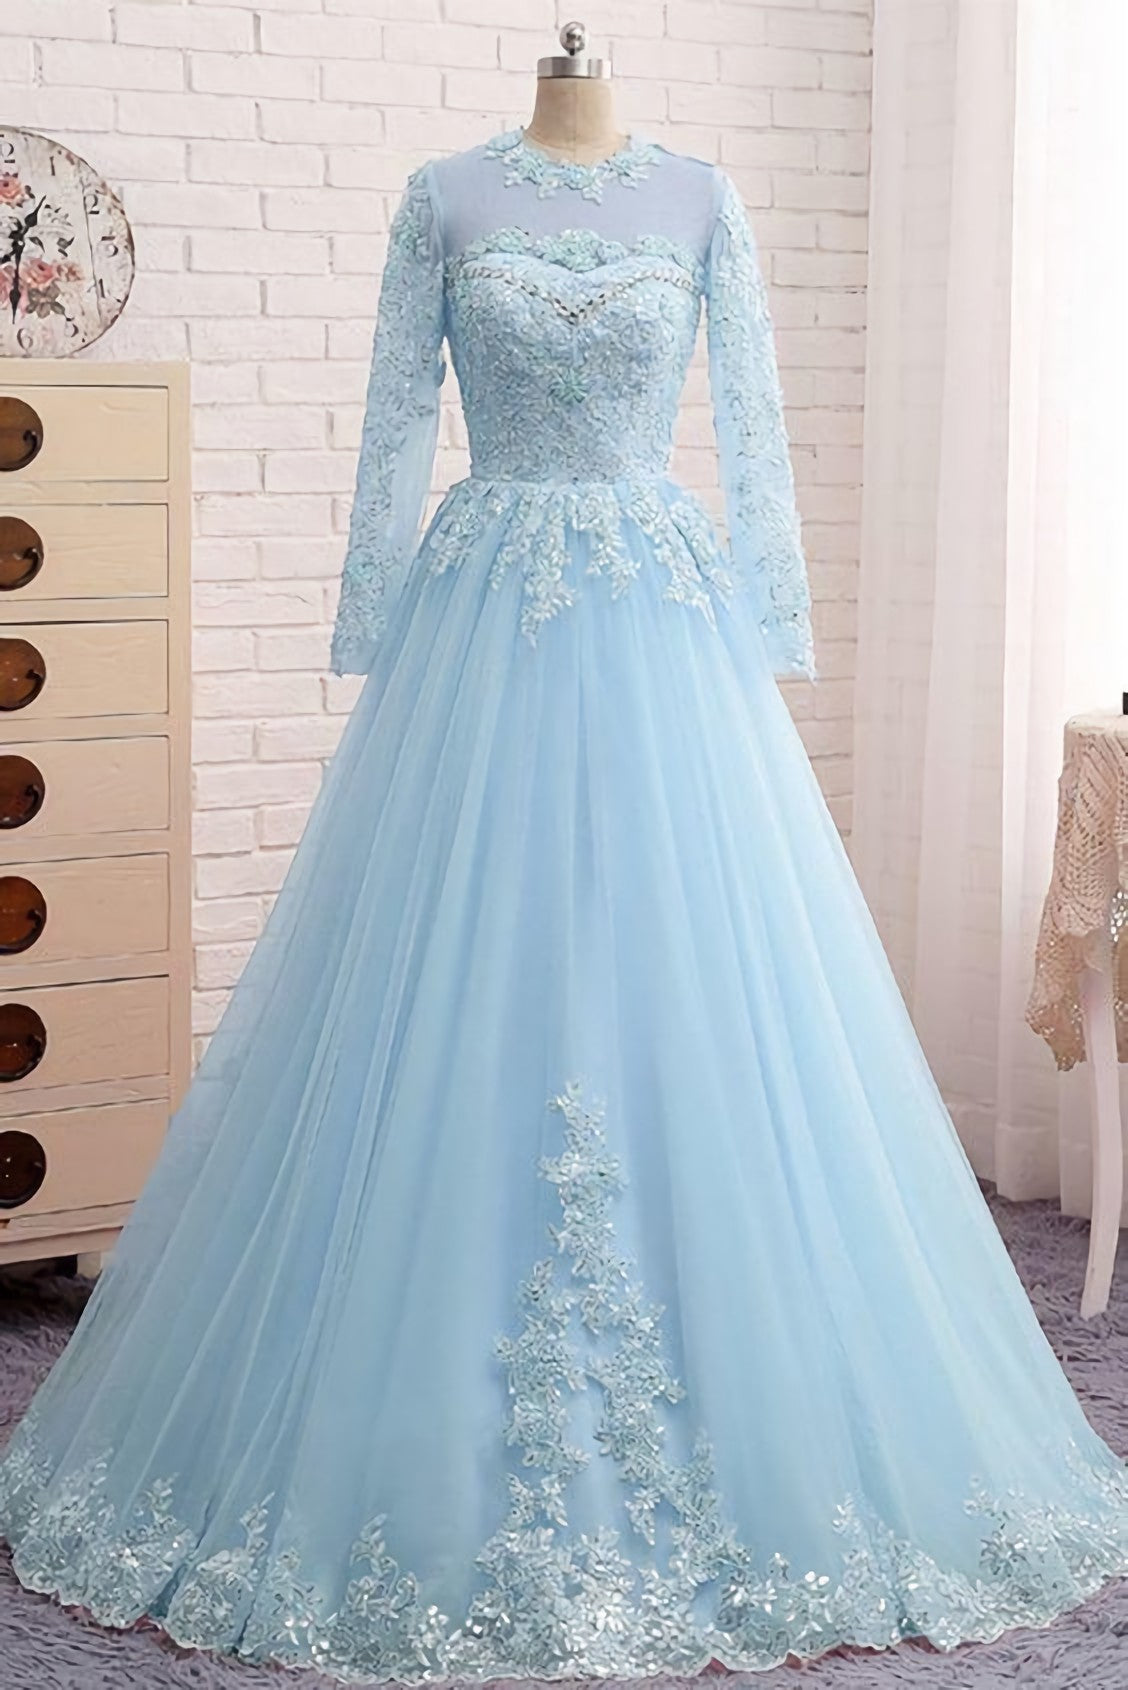 Prom Dress Long Sleeve Ball Gown, Blue Lace Tulle Long Sleeve Beaded Formal Prom Dress